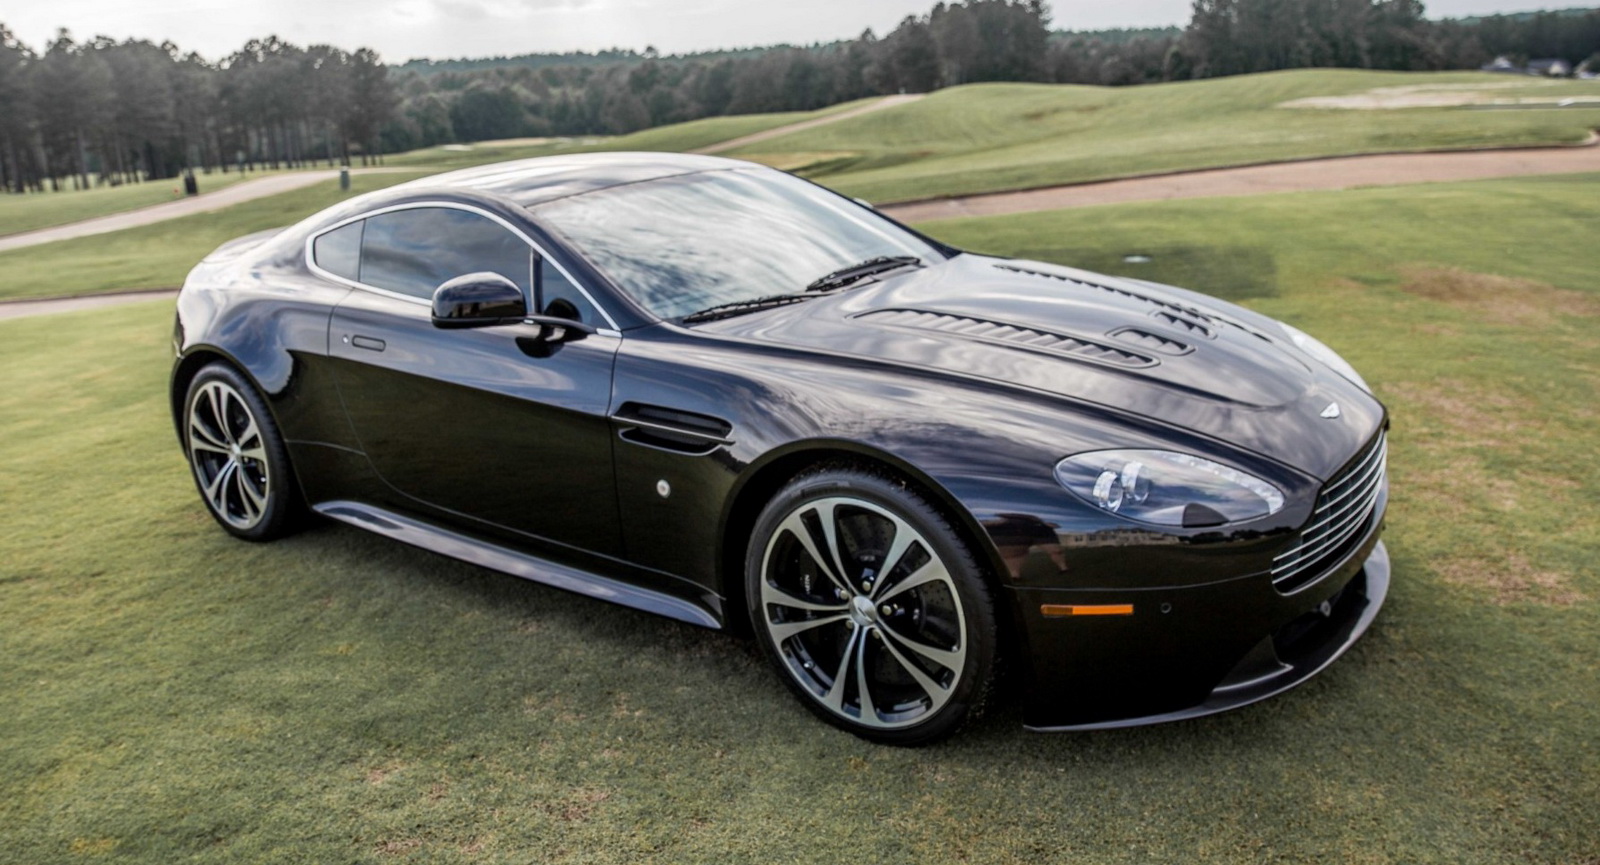 A Manual Aston Martin V12 Vantage Is The Greatest Supercar Bargain Right  Now | Carscoops